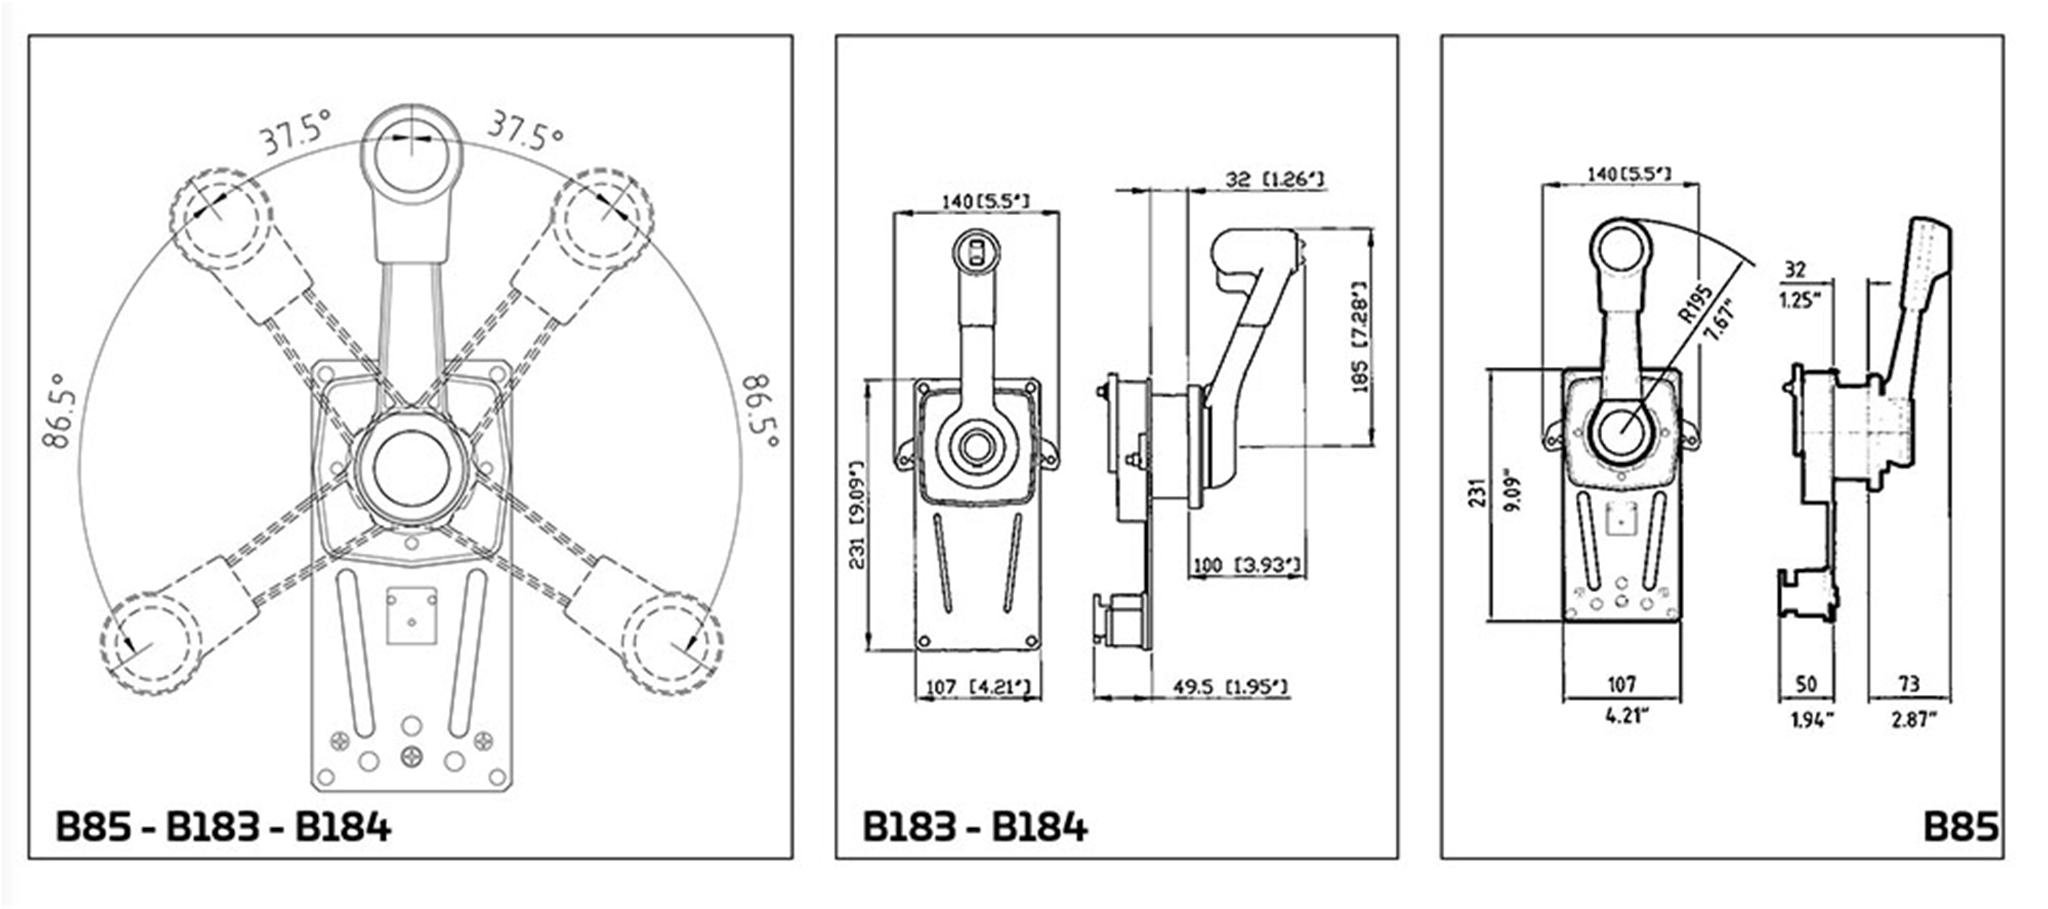 B184Merc 39773 D Mercury Side Mount Controls With Trim Specifications